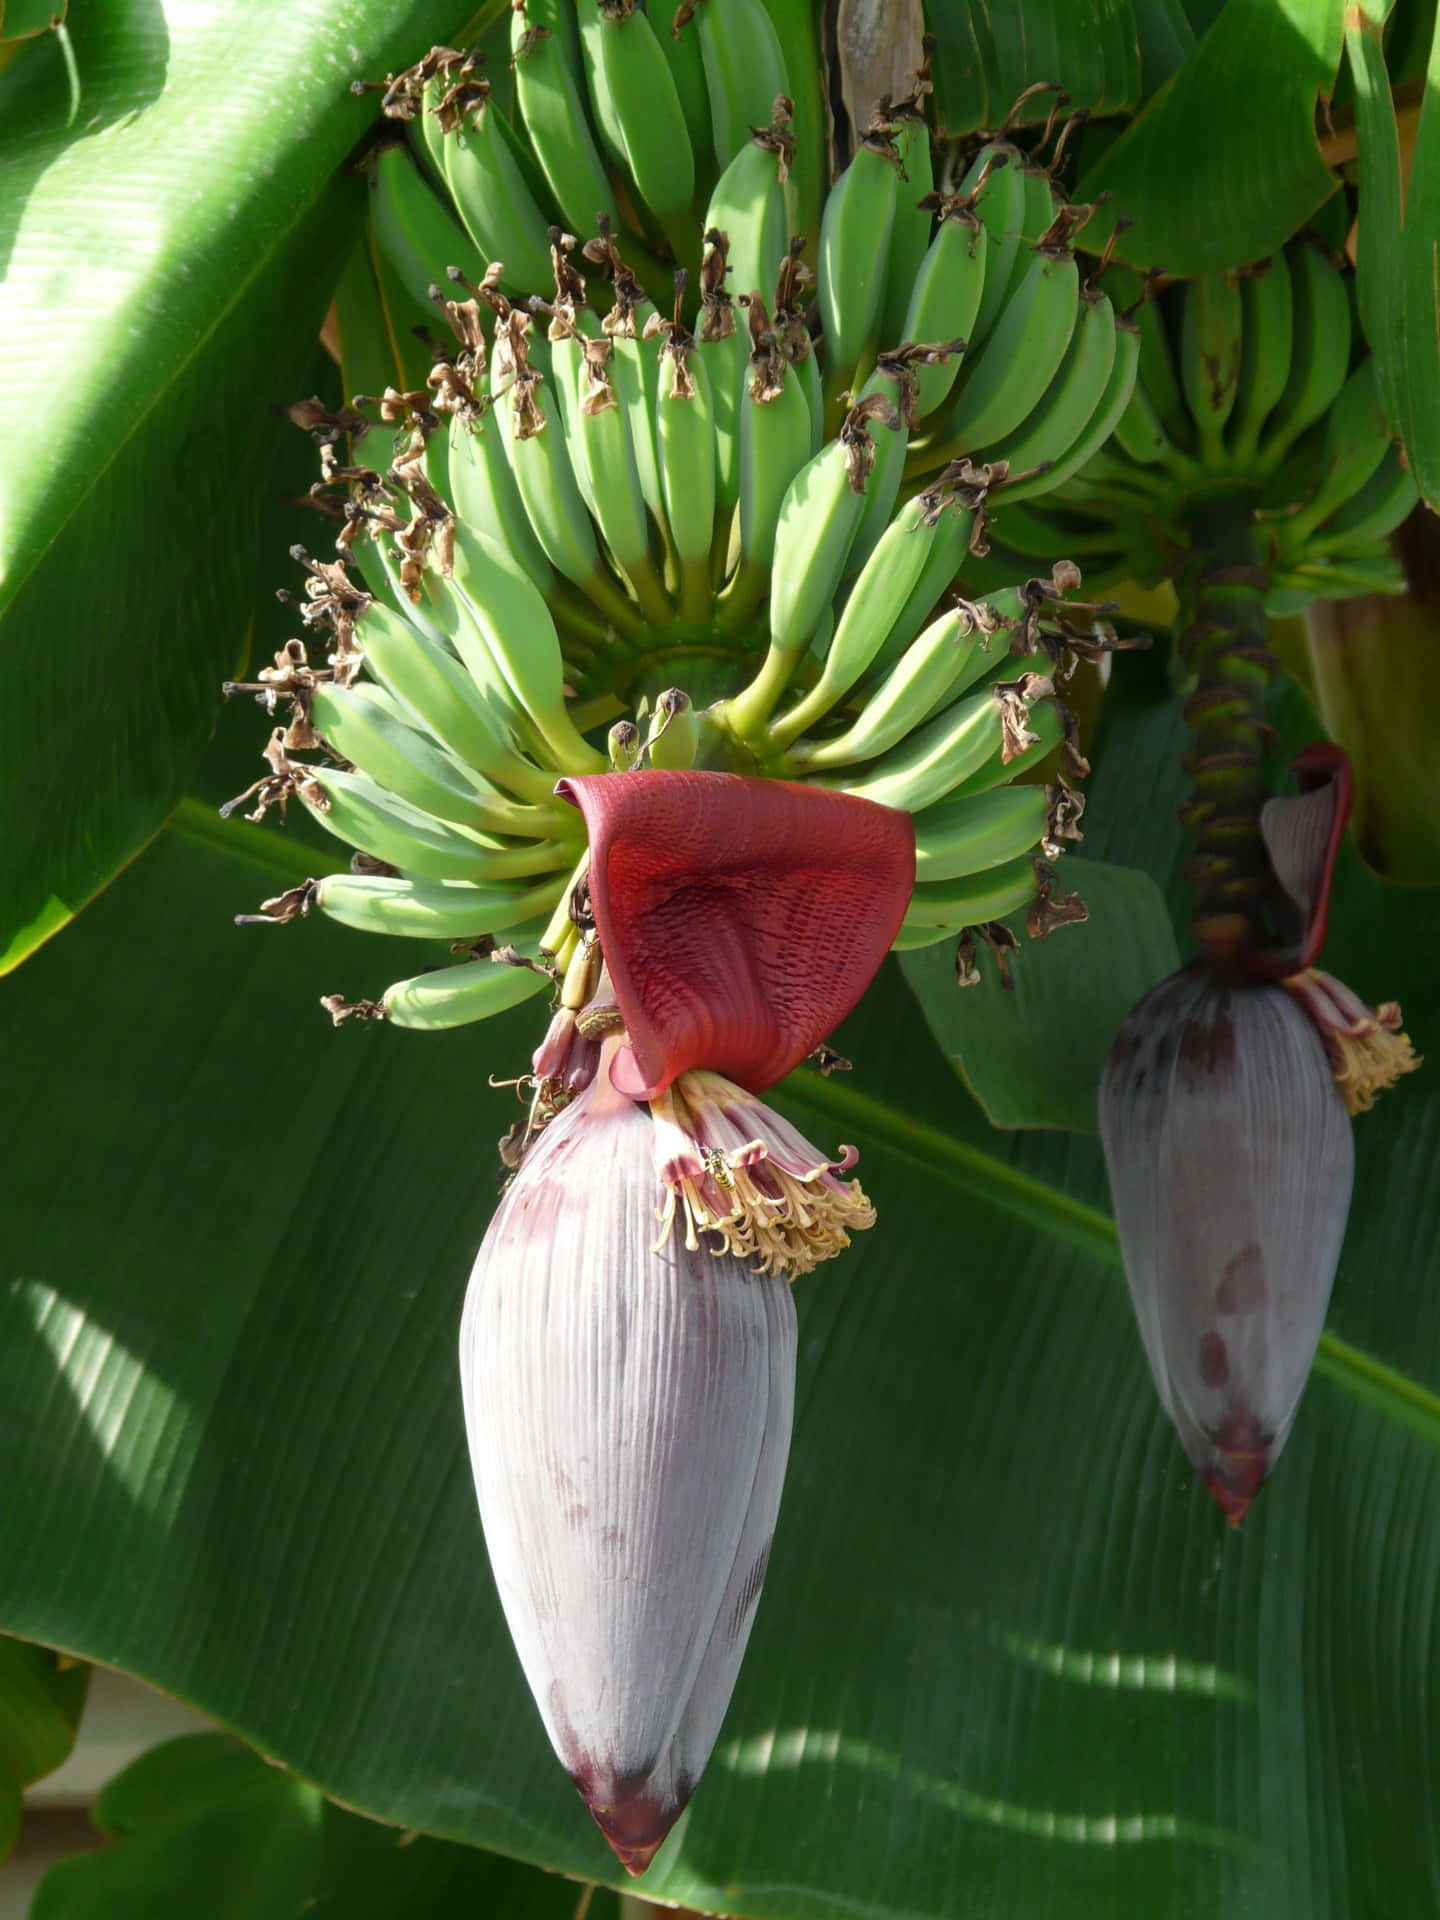 The lush, green leaves of a banana tree are a tropical symbol of abundance